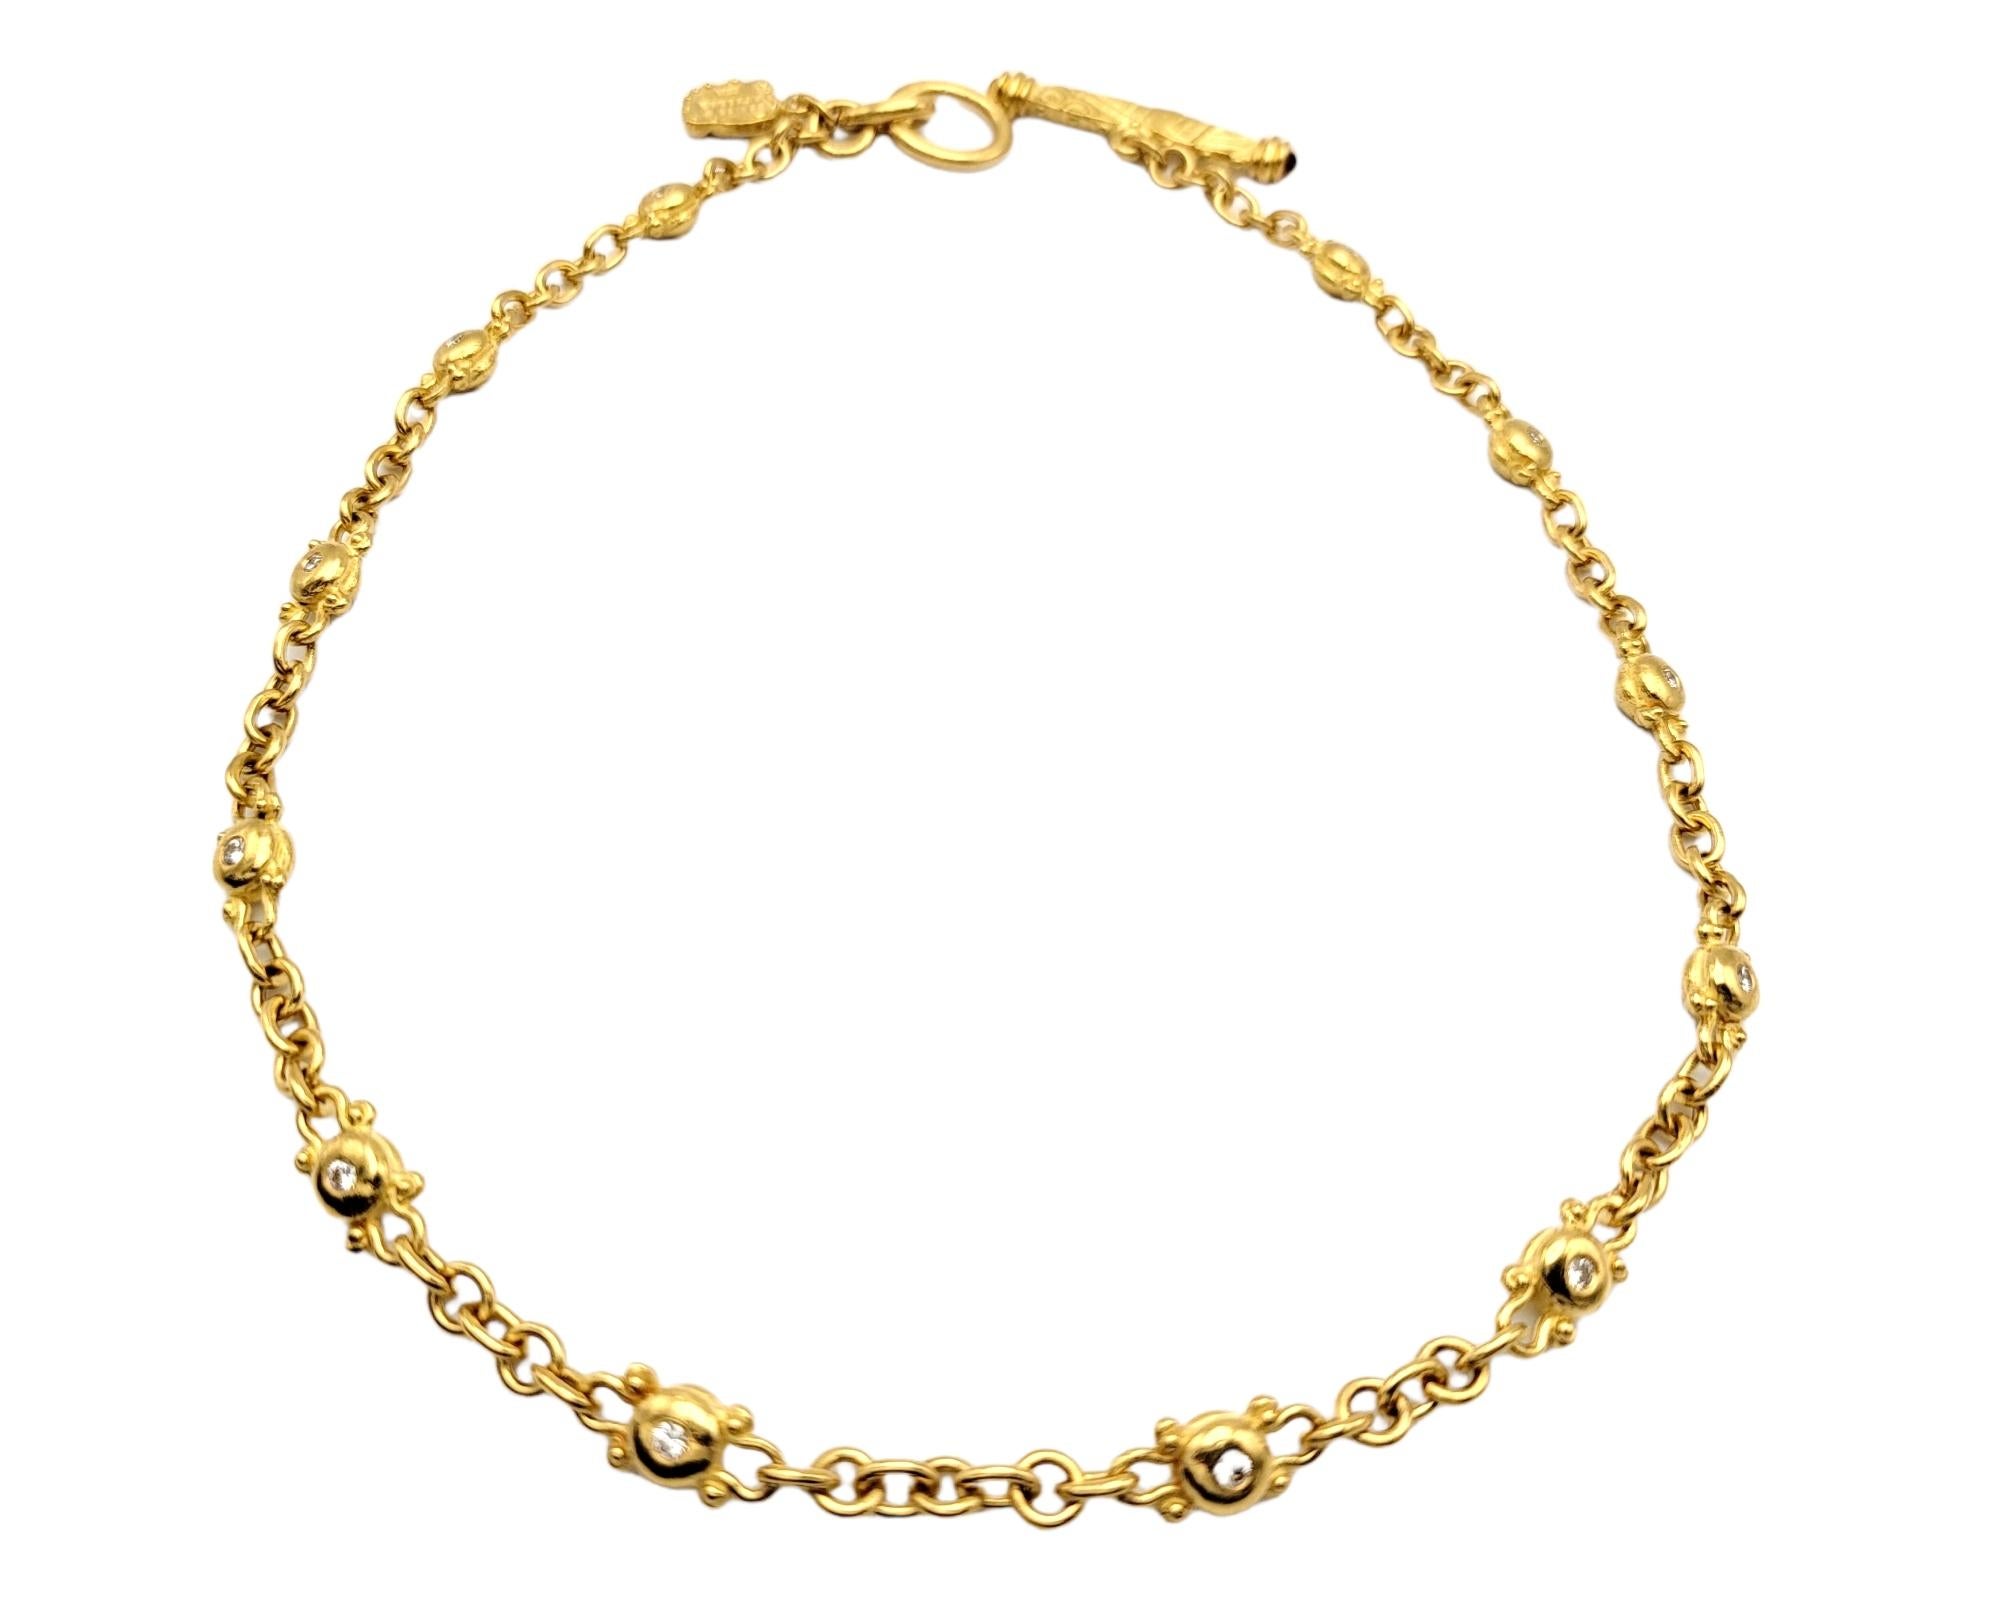 Gorgeous 22 karat gold link necklace by designer Denise Roberge. Warm yellow gold bubble style links are accented with glittering diamonds to create a luxurious look. We love how this versatile piece can be dressed up or down and worn with just